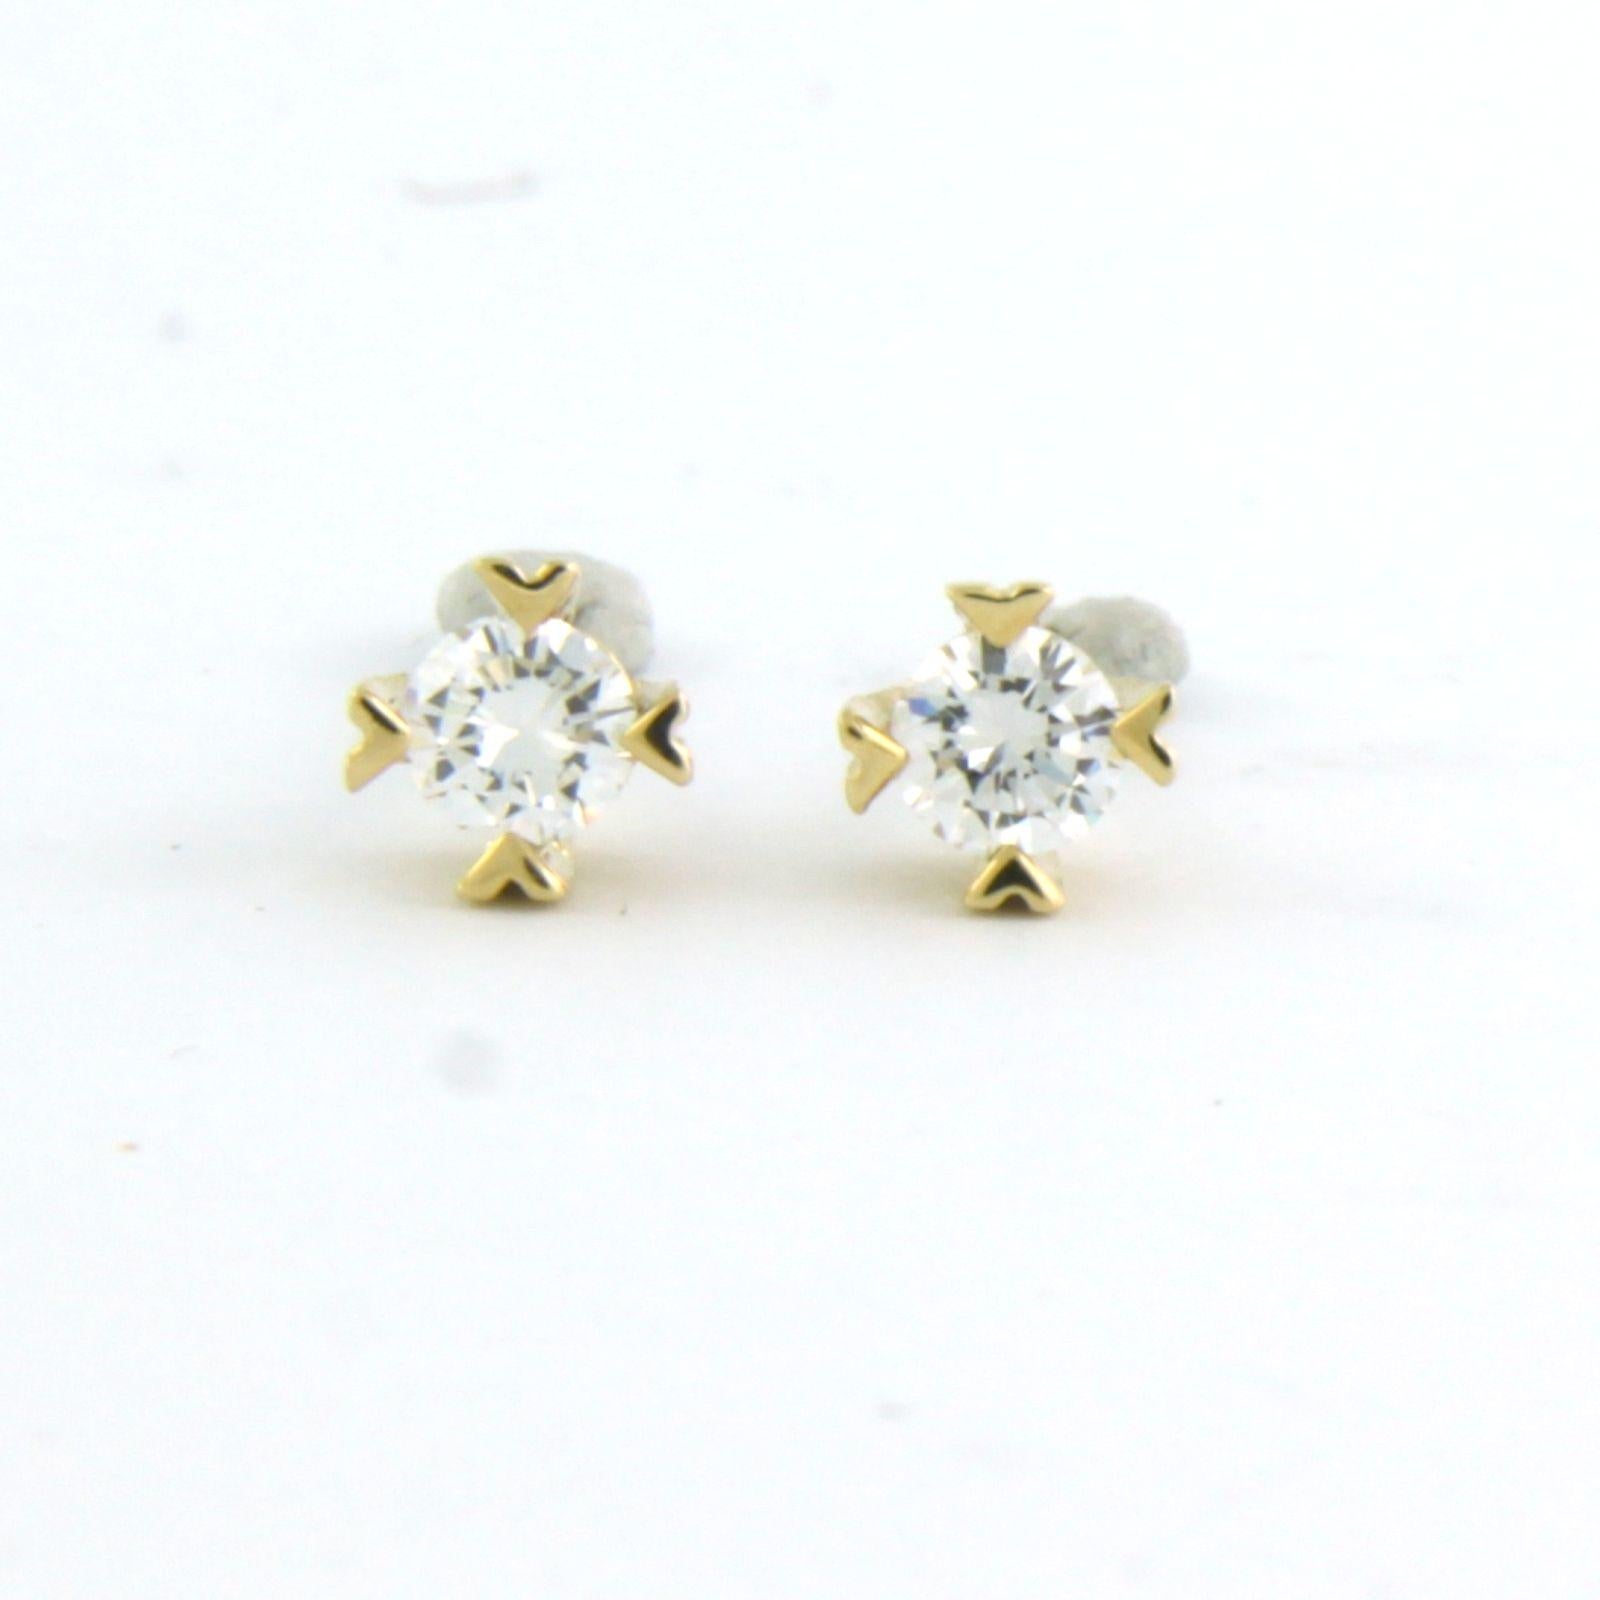 18k yellow gold solitaire earrings set with brilliant cut diamonds. 0.26ct - K/L - VS/SI

detailed description:

the front of the ear stud is 4.9 mm wide

weight 1.1 grams

Occupied with:

- 2 x 3.2 mm brilliant cut diamond, approximately 0.26